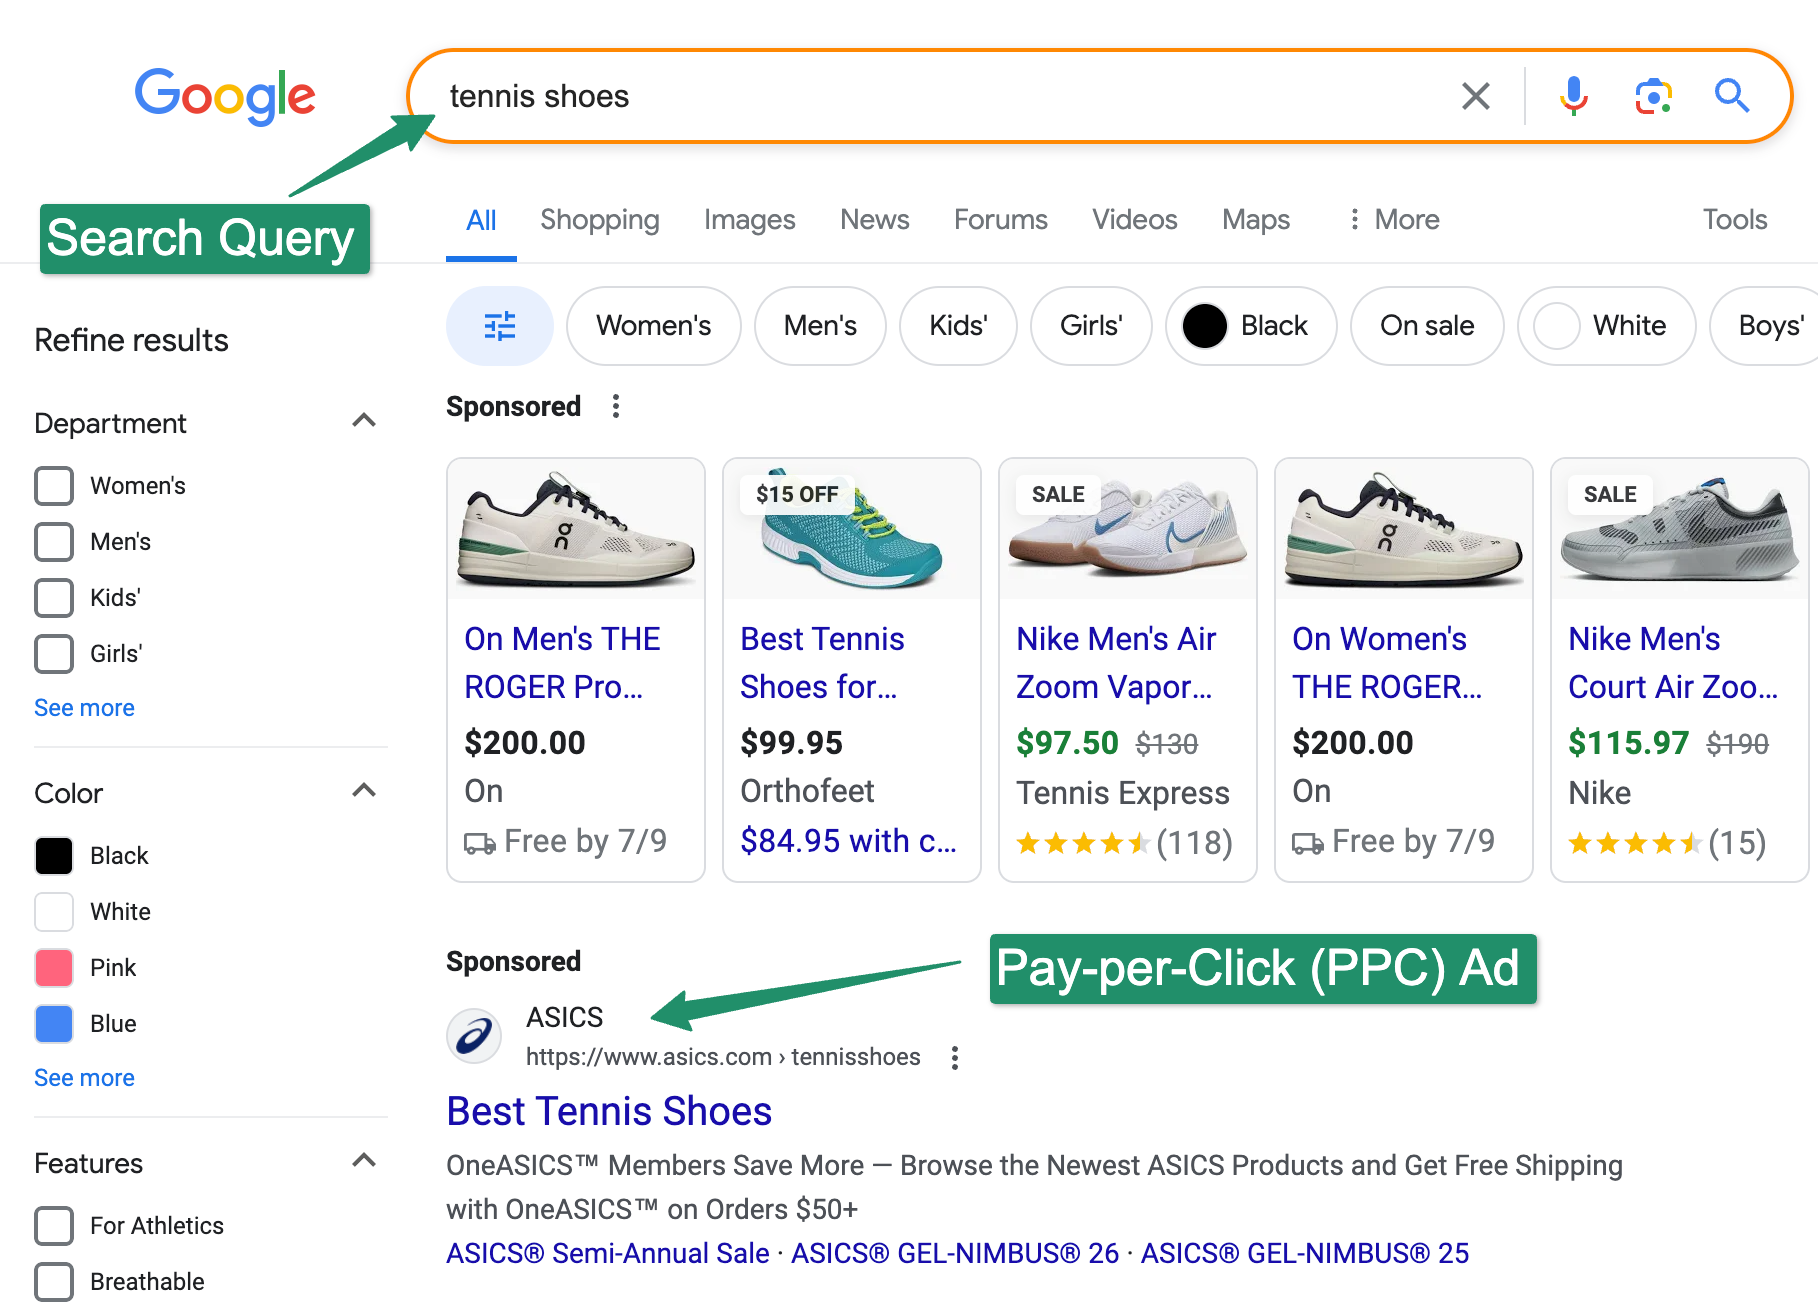 Organic results and paid ads on Google SERP for the keyword “tennis shoes”